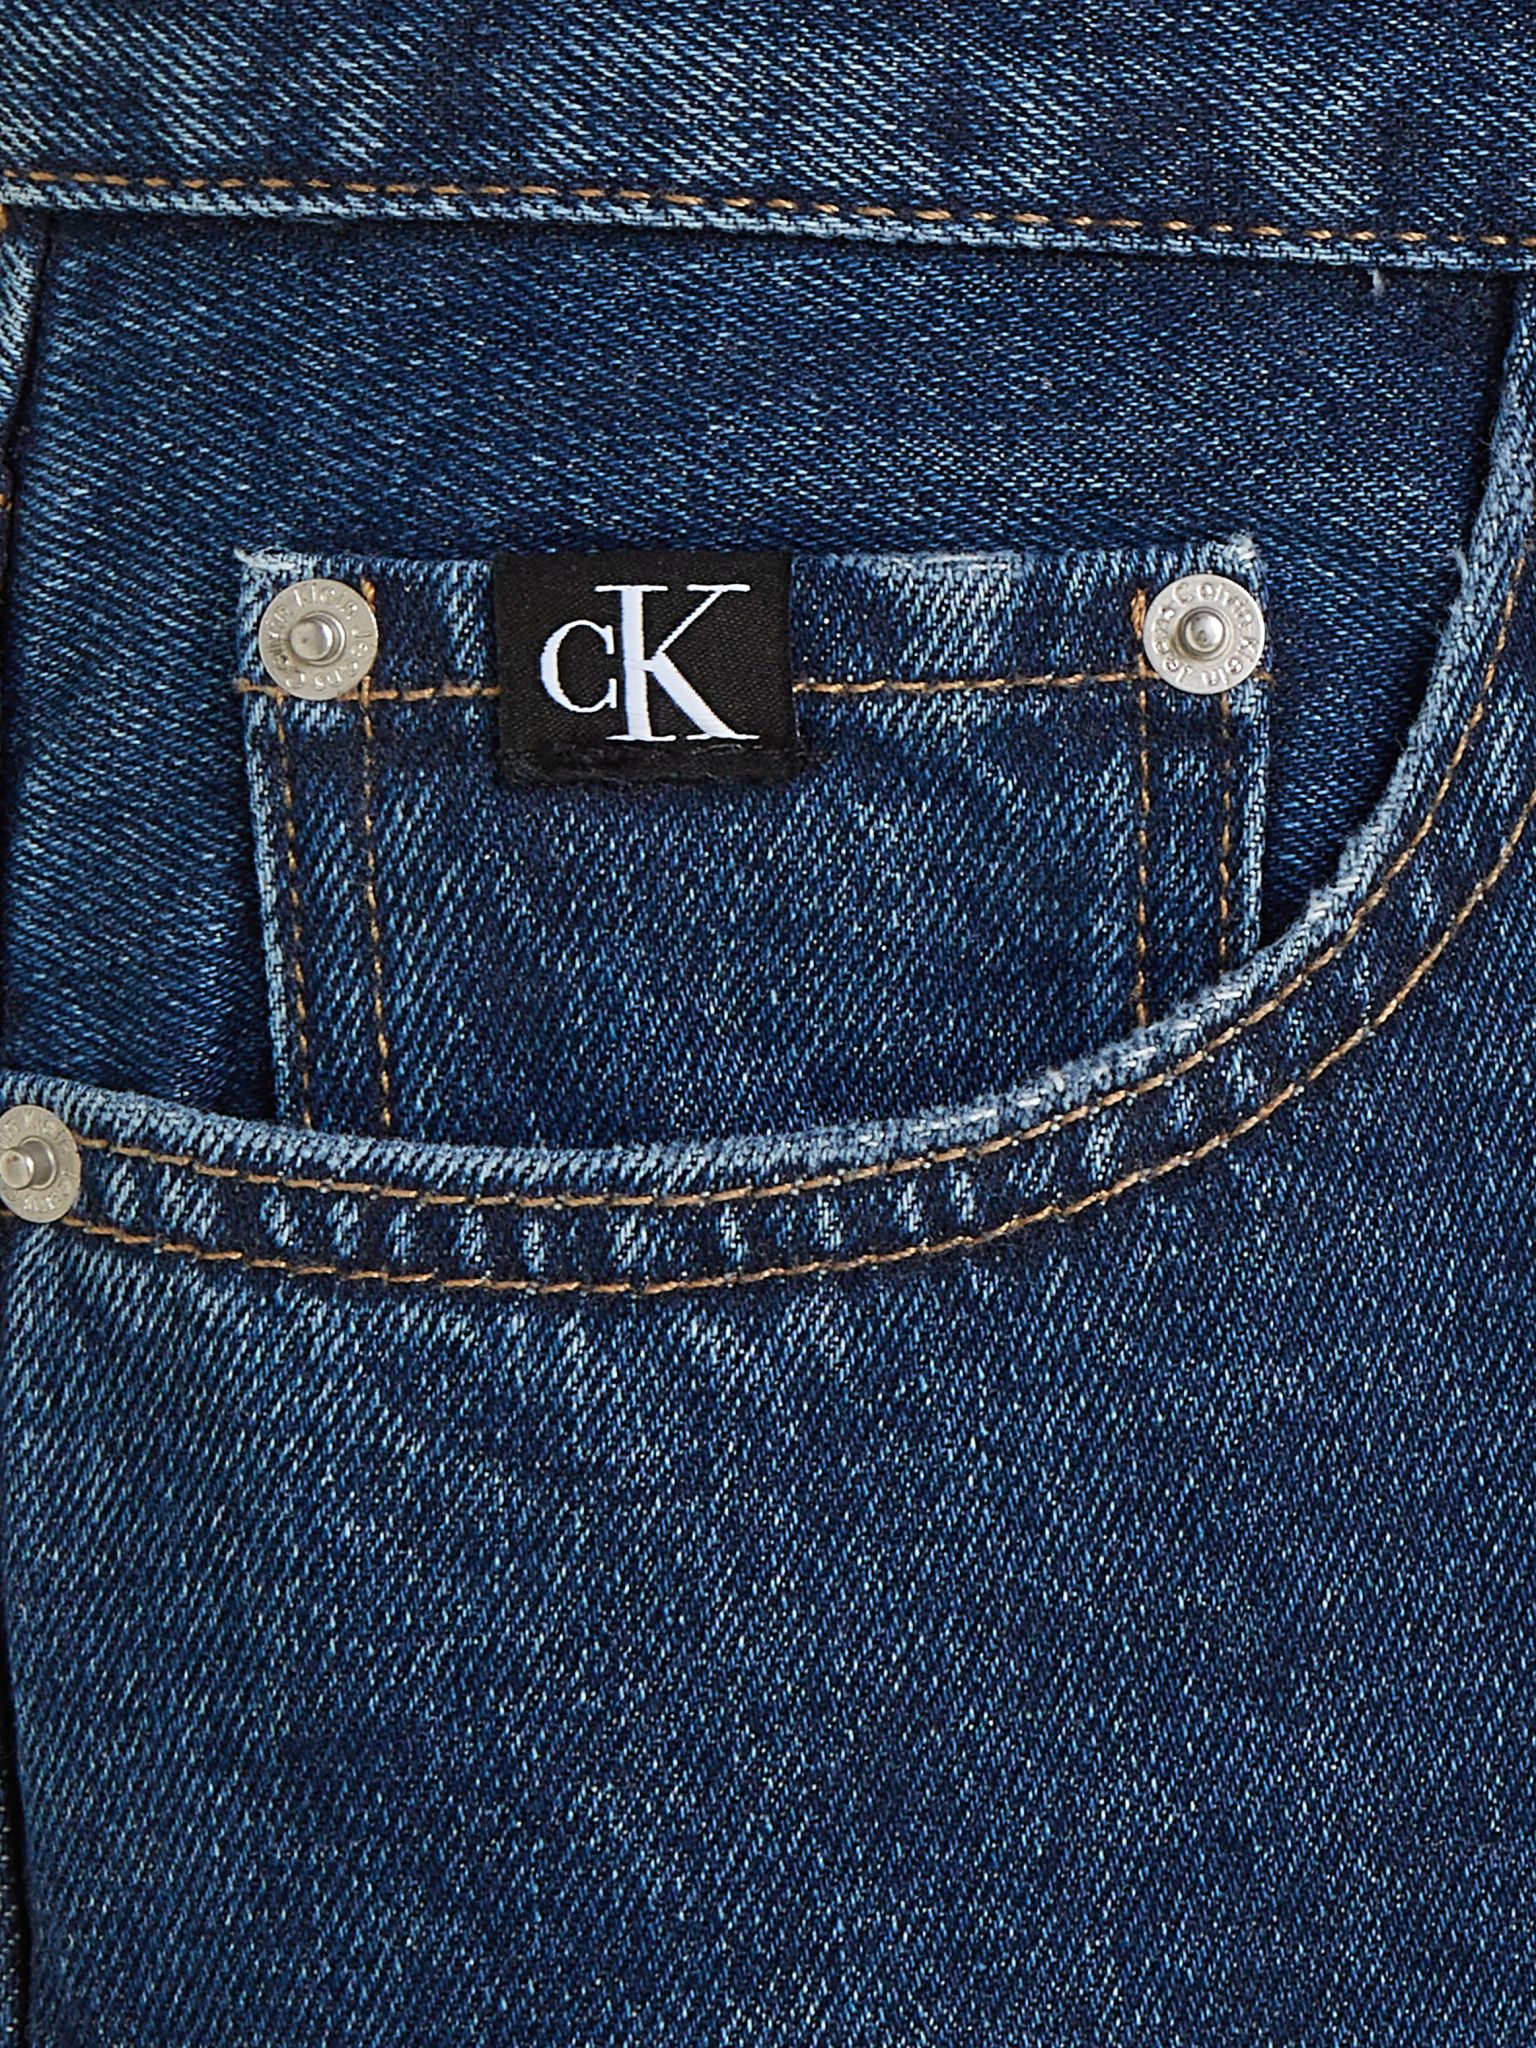 CALVIN KLEIN JEANS Tapered Jeans 10728408